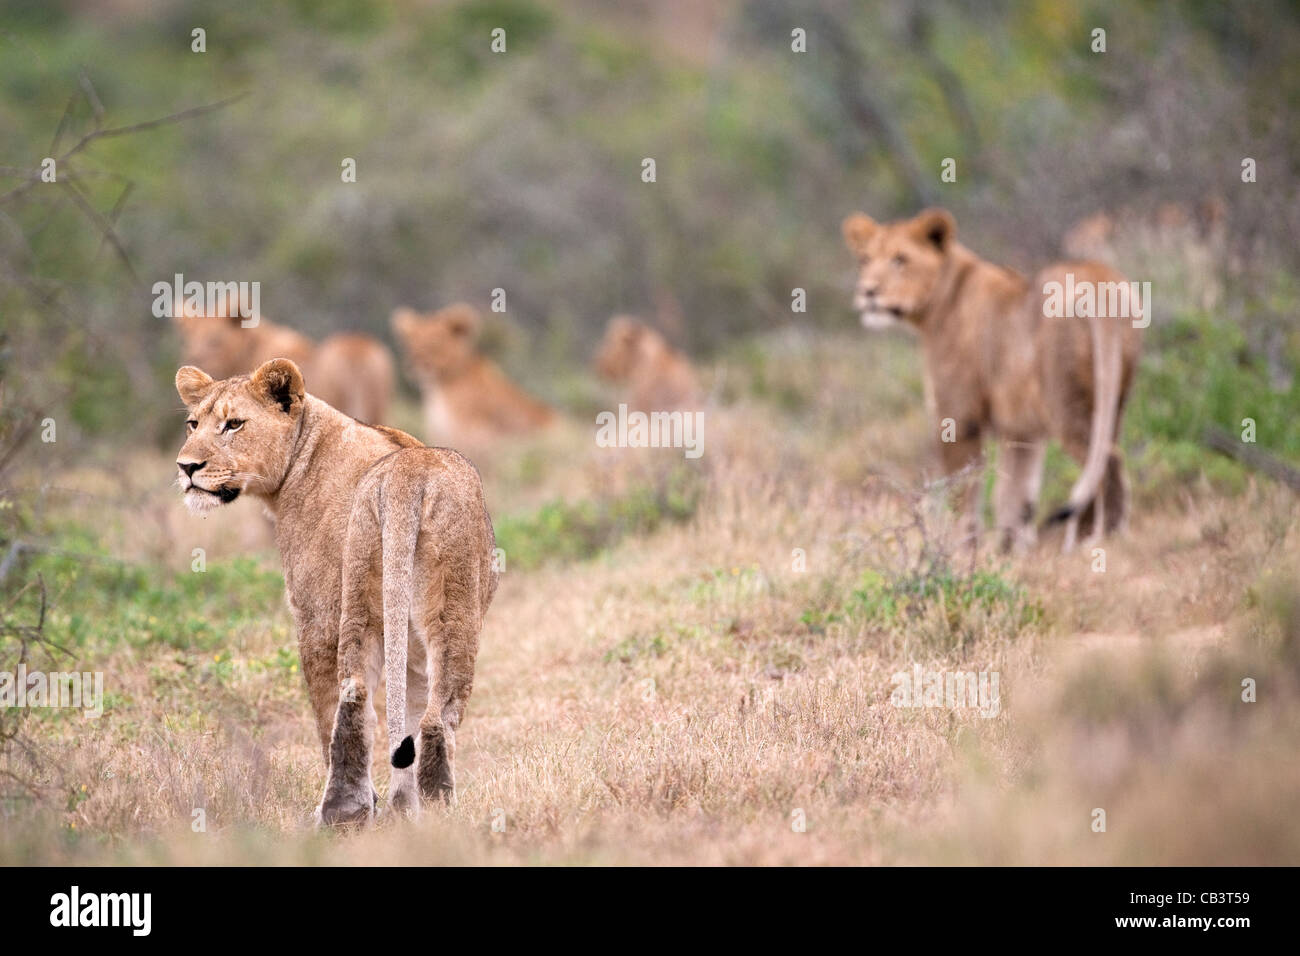 Lion pride, Panthera leo, hunting warthog, Kwandwe private reserve, Eastern Cape, South Africa Stock Photo